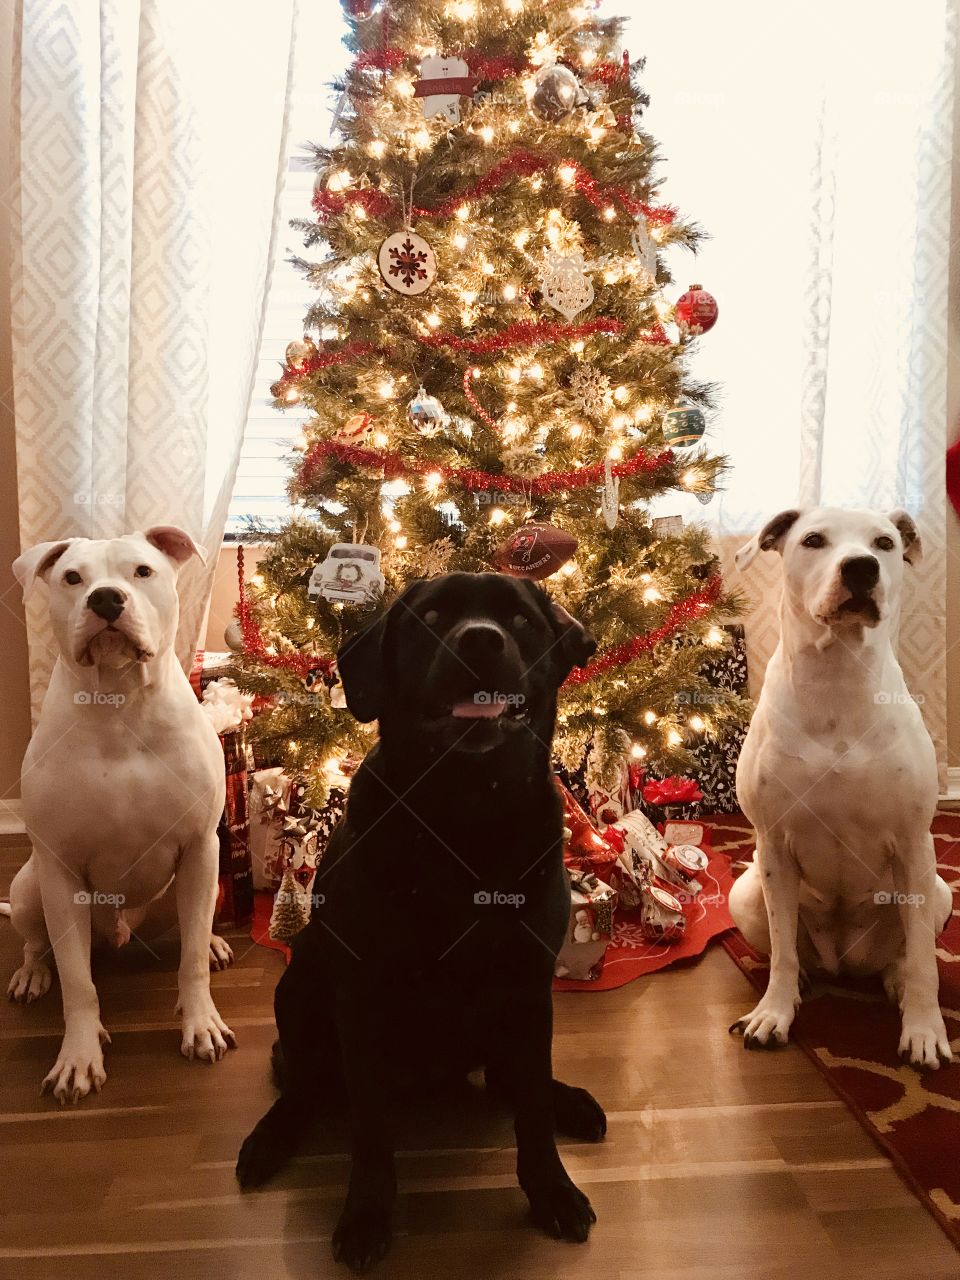 Christmas with the puppy crew